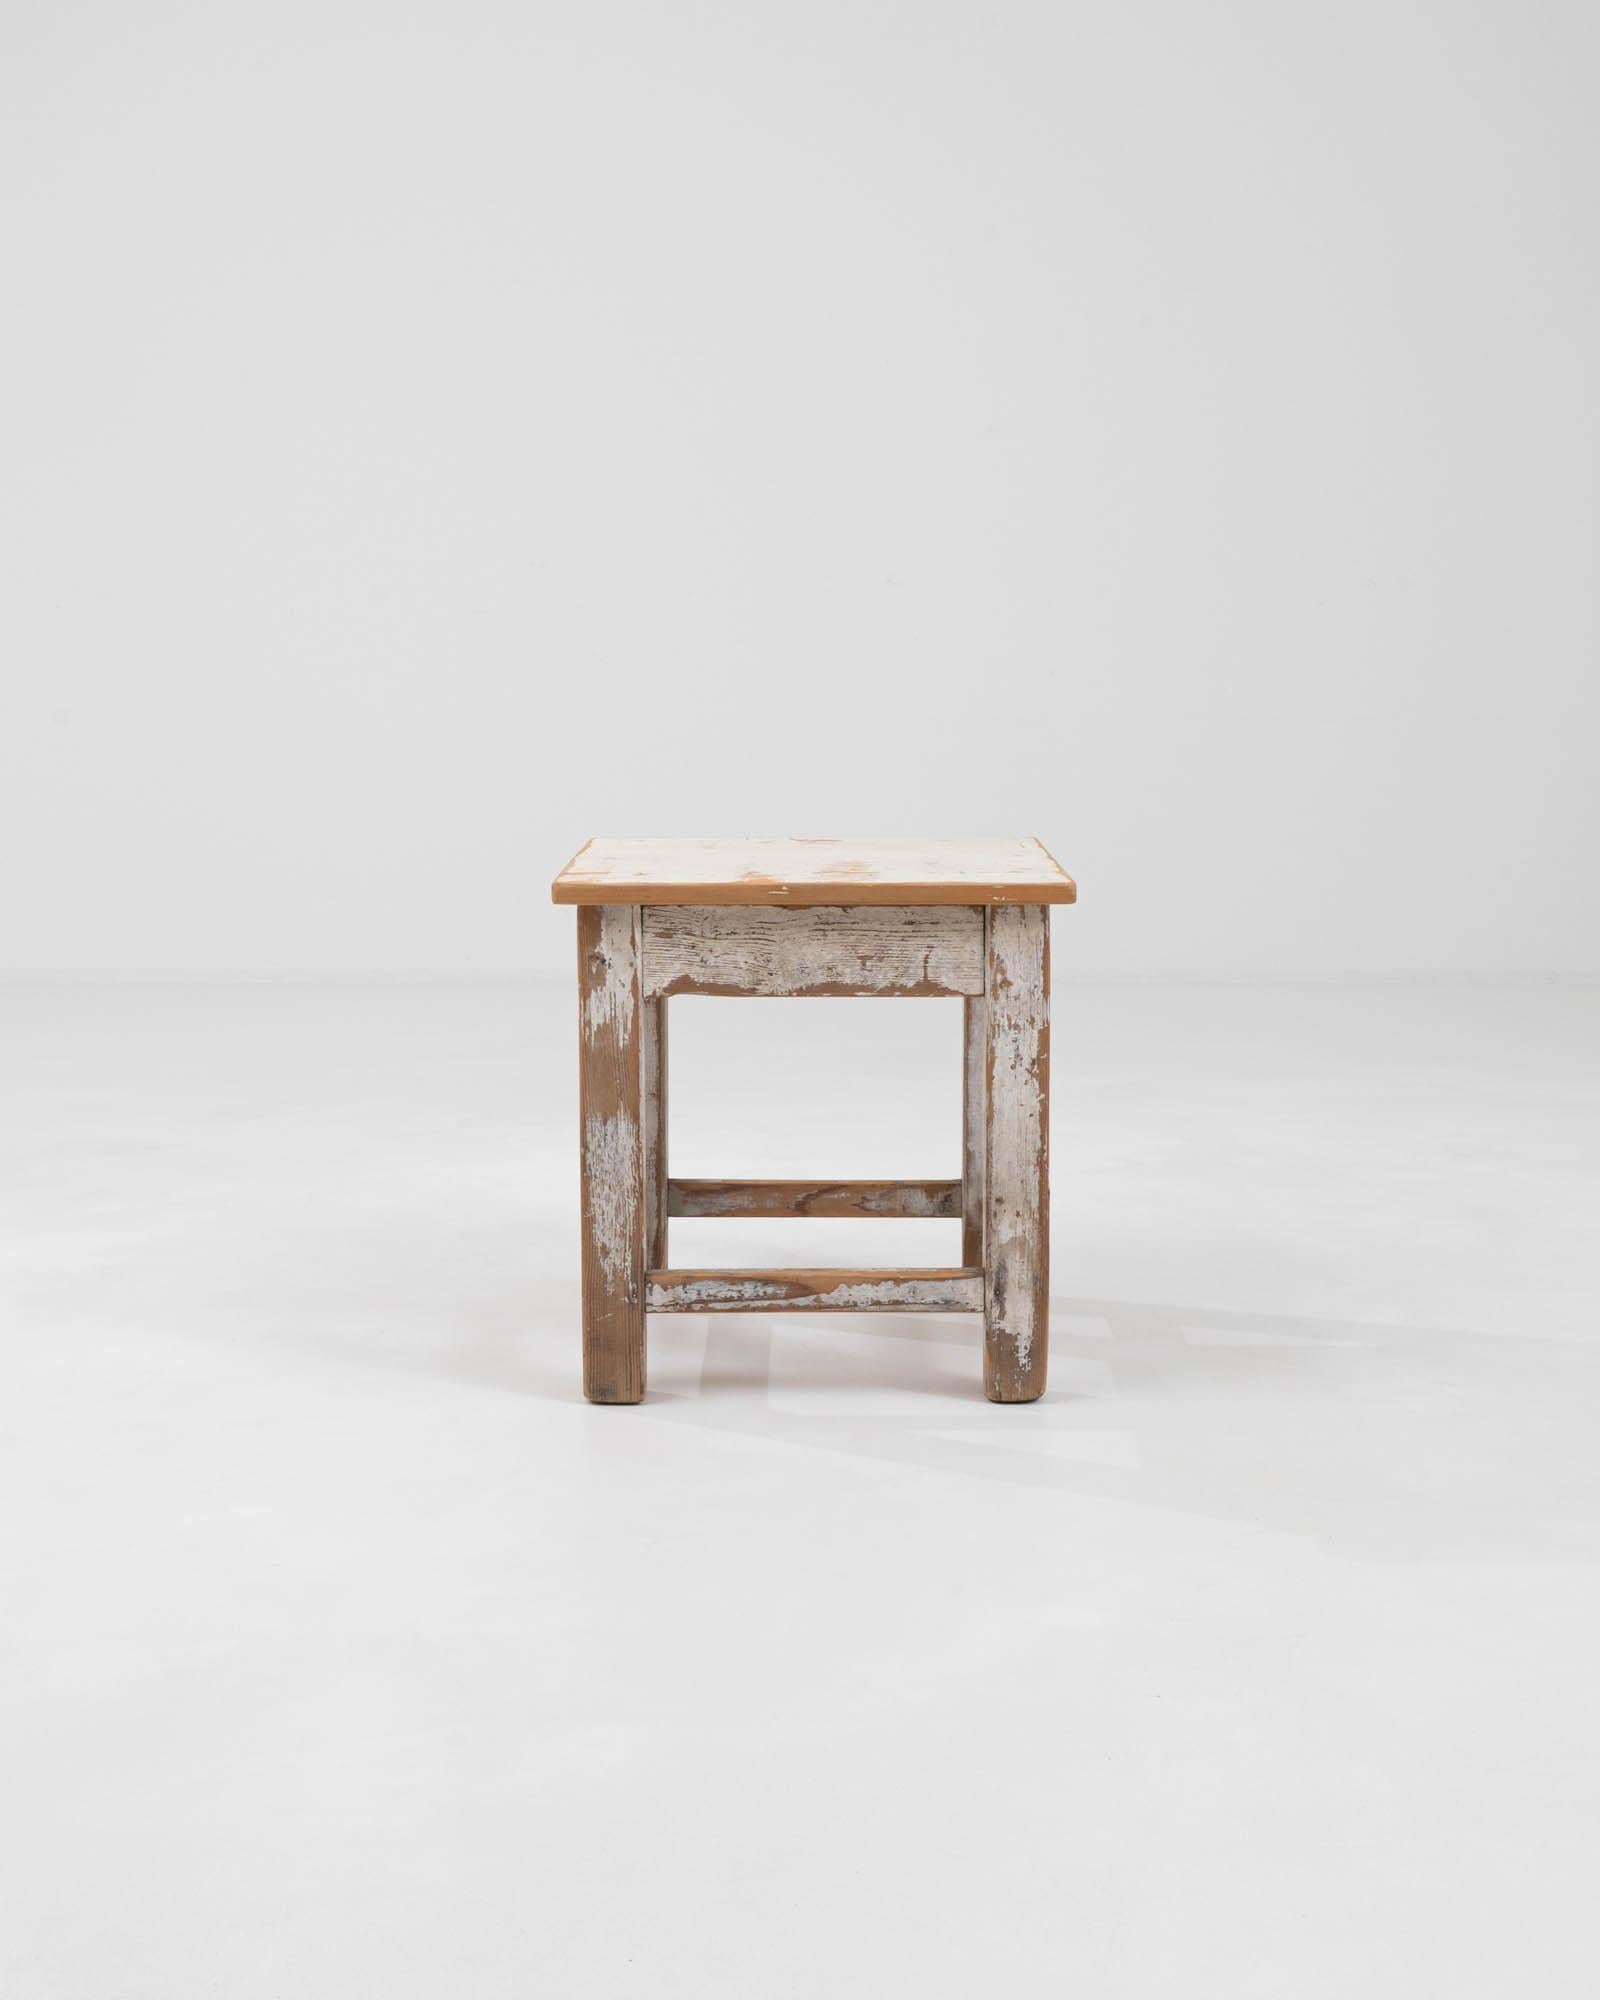 Introducing a piece that tells a story with every knot and grain, our Early 20th Century Central European Wood Patinated Stool exudes a rustic charm that is as enduring as its construction. Crafted during a time when meticulous craftsmanship was the